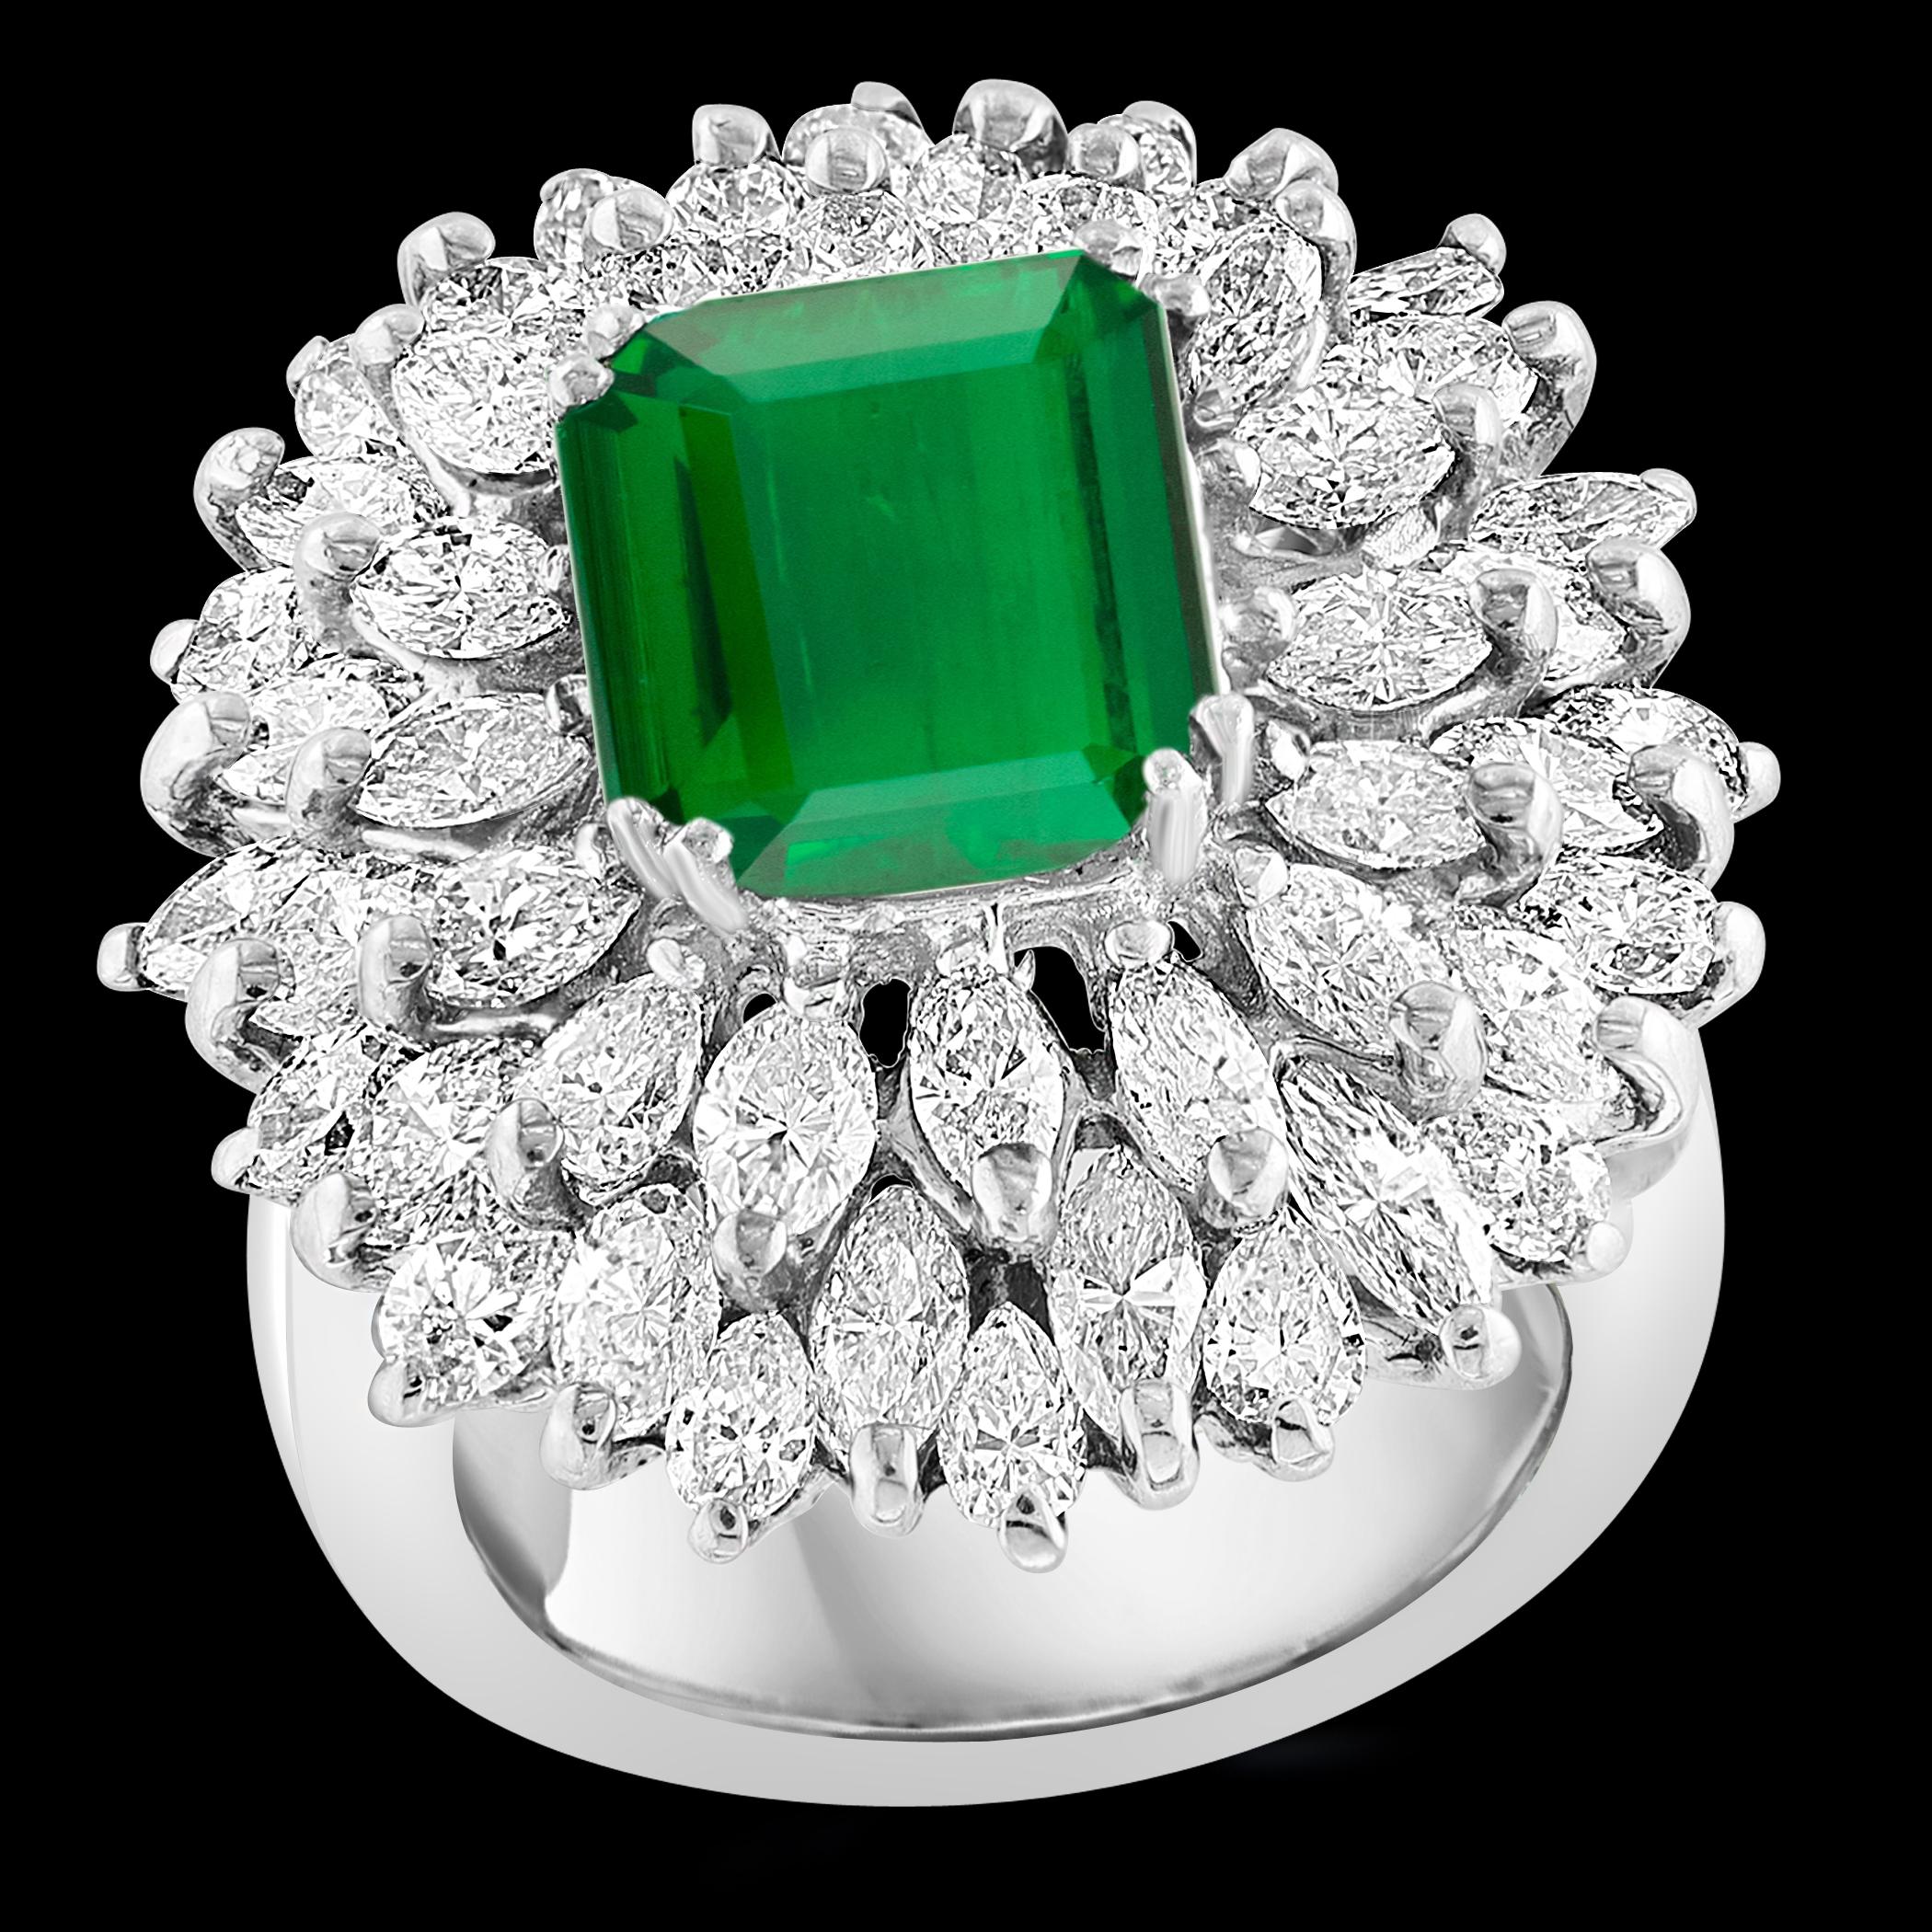 **4 Carat Emerald Cut Colombian Emerald & 5.5 Ct Diamond Ring in Platinum Size 6**

A classic ring featuring a stunning 4 Carat Colombian Emerald of exceptional quality, color, and luster. The emerald, originating from Colombia, is a rare find due